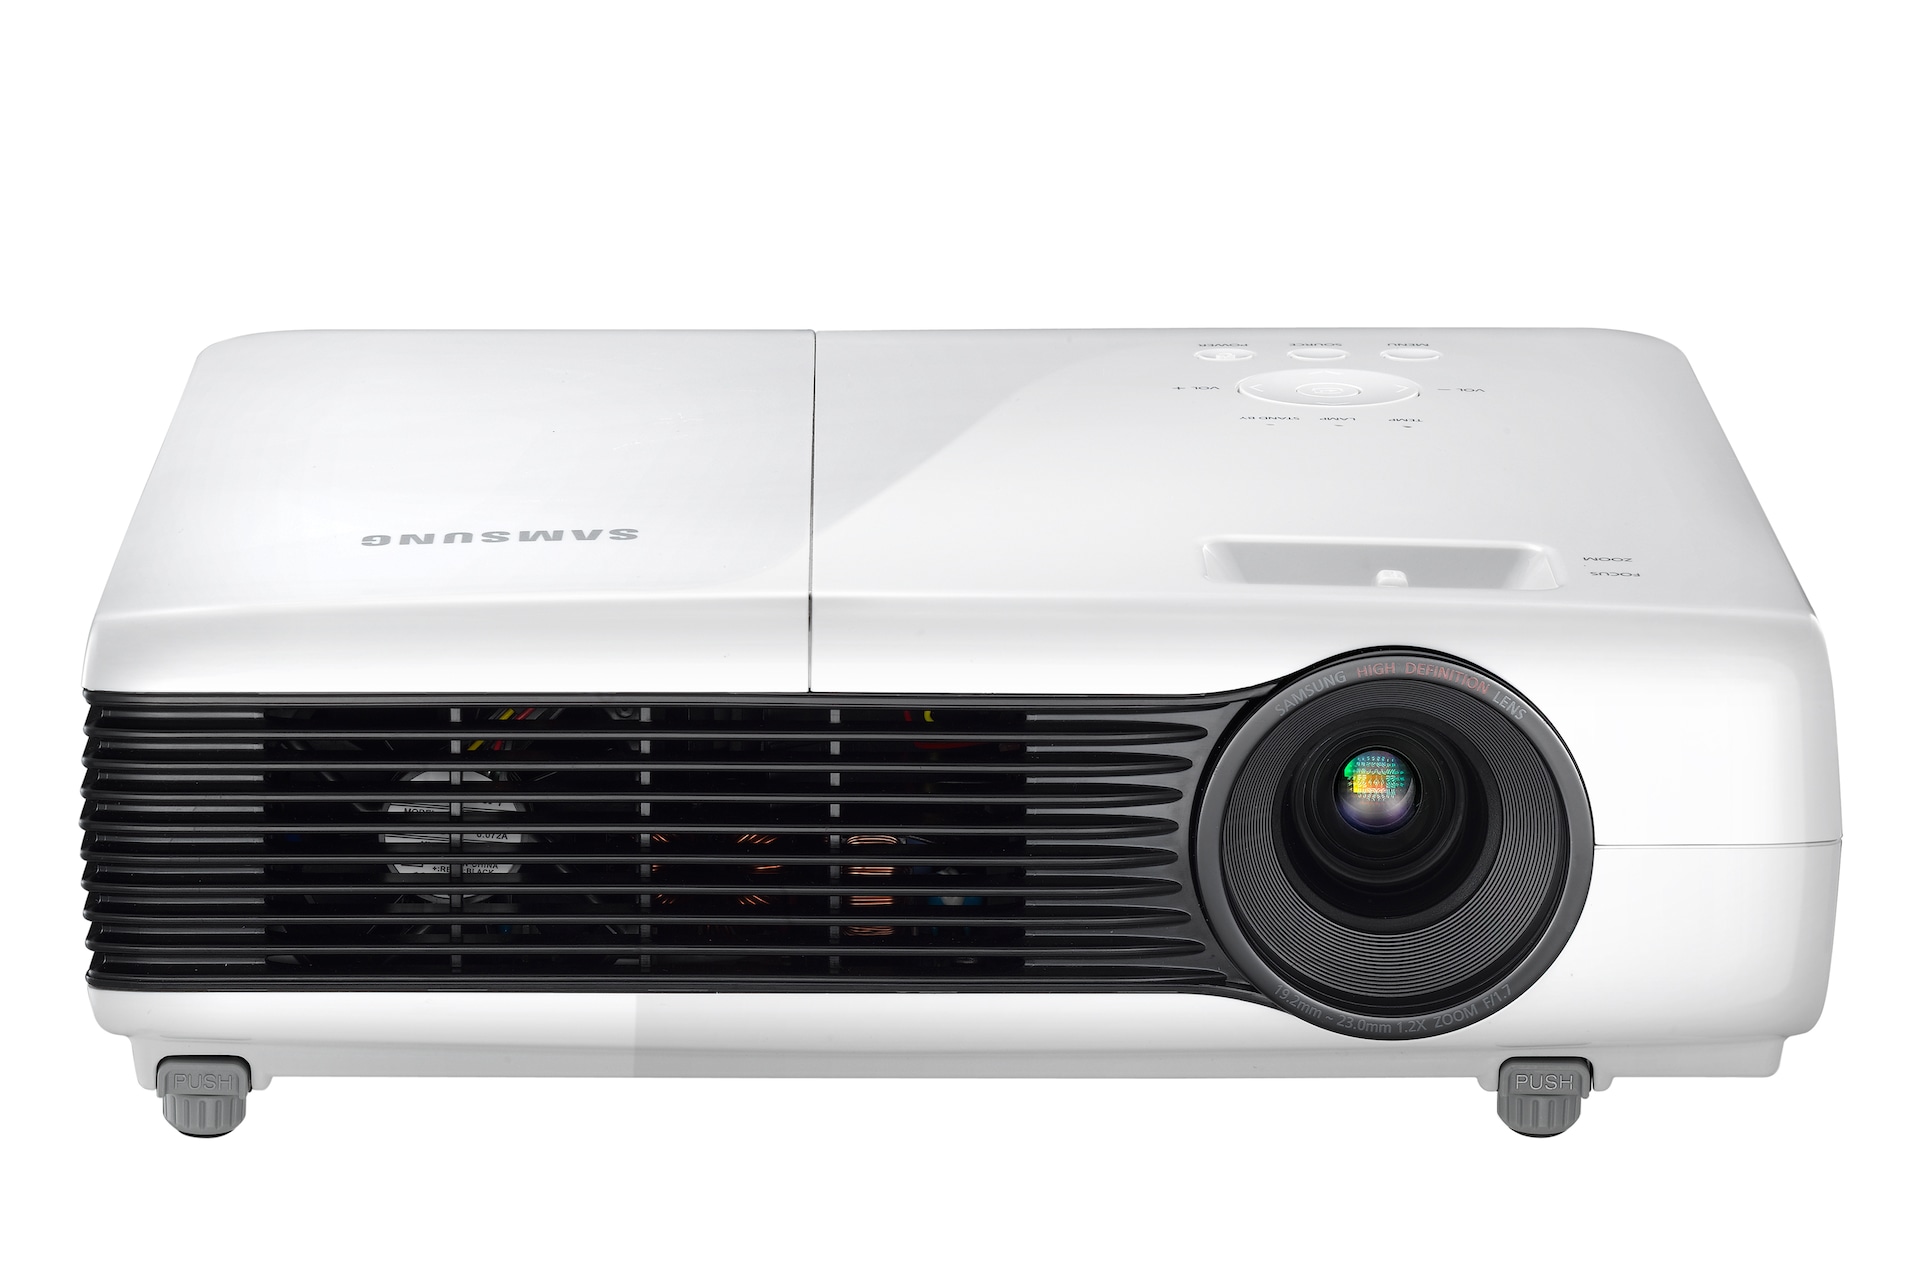 M200 Mobile Data Projector | Samsung Support UK